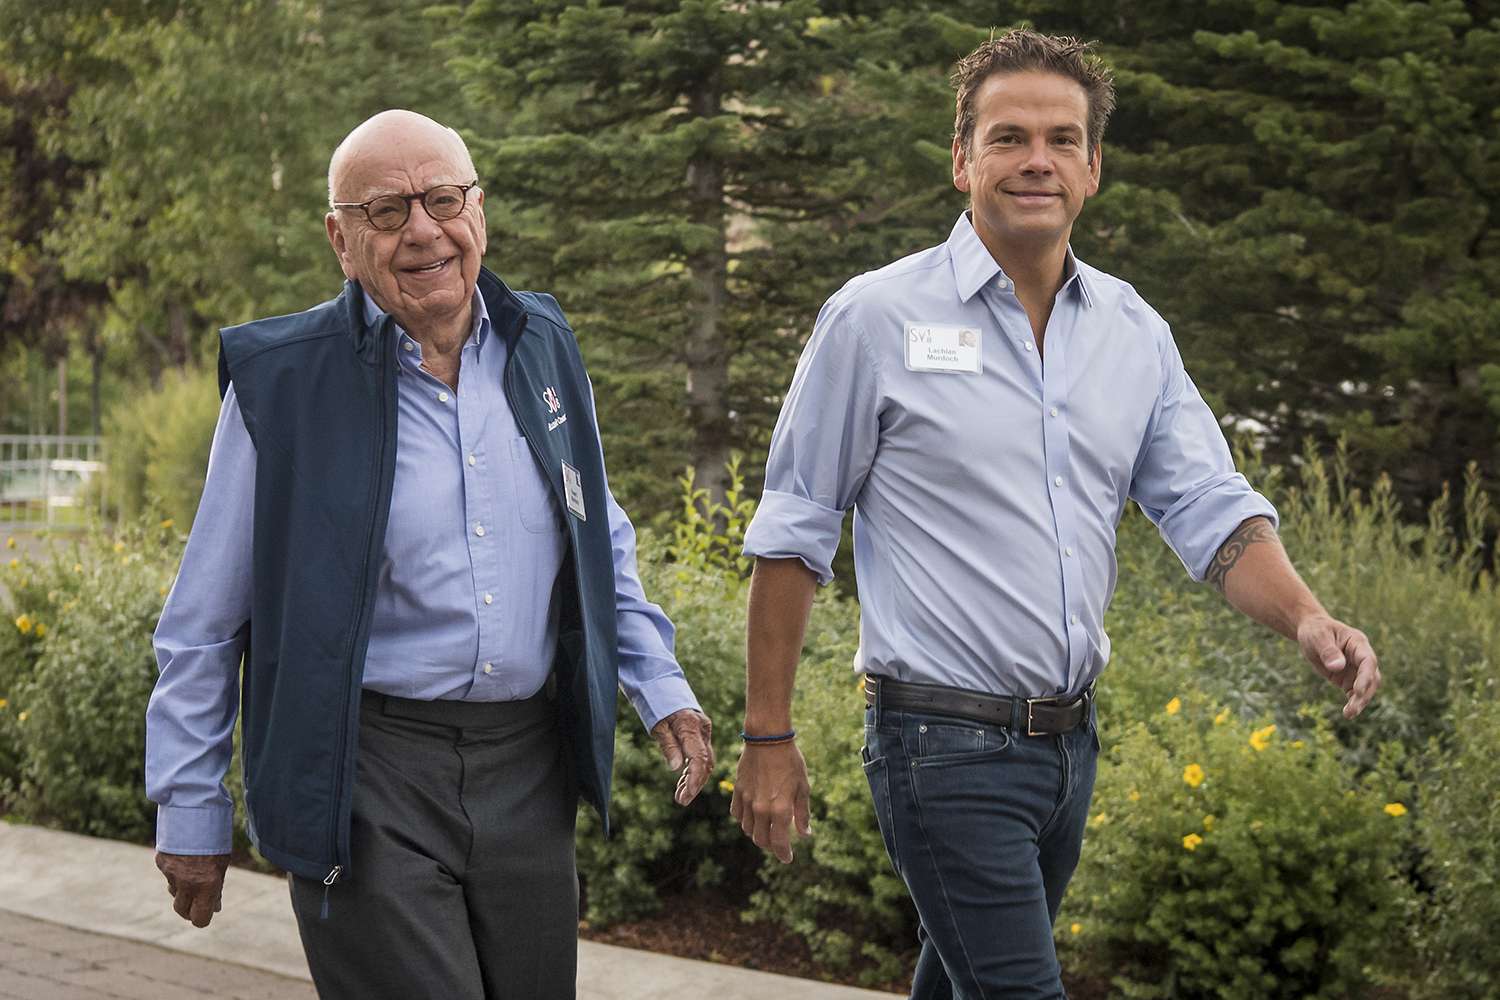 Rupert Murdoch, co-chairman of Twenty-First Century Fox Inc., left, and Lachlan Murdoch, co-chairman of Twenty-First Century Fox Inc., arrive for a morning session at the Allen & Co. Media and Technology Conference 